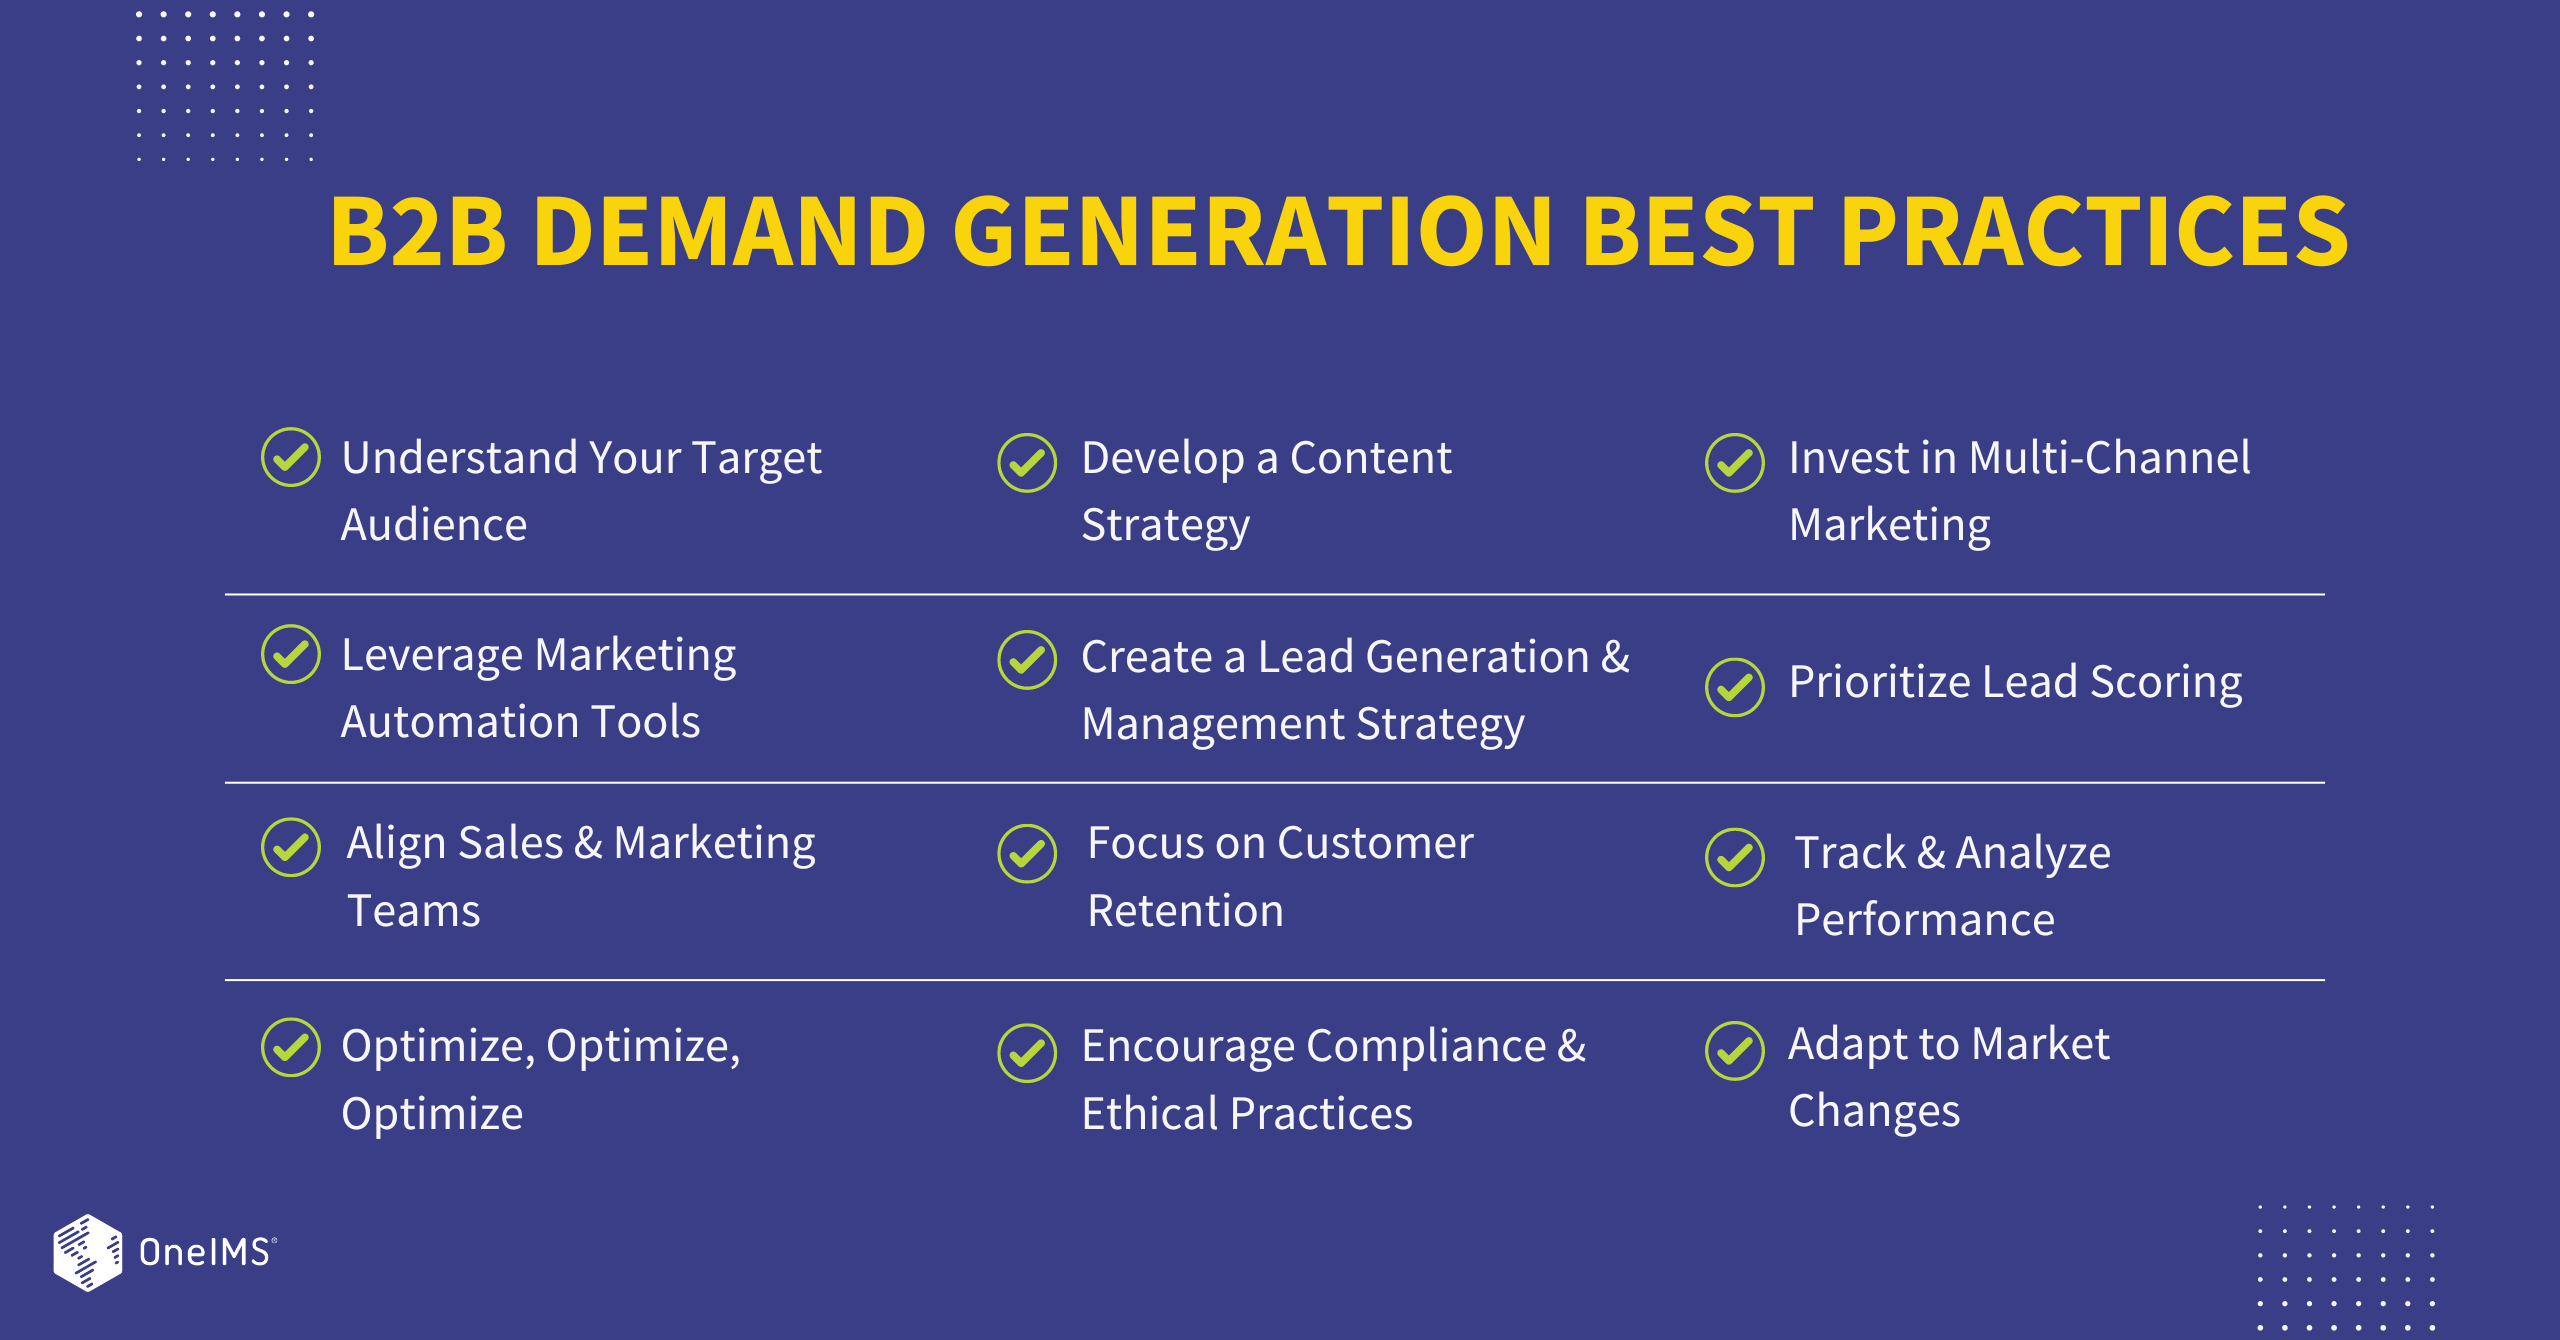 Demand Generation Best Practices for B2B